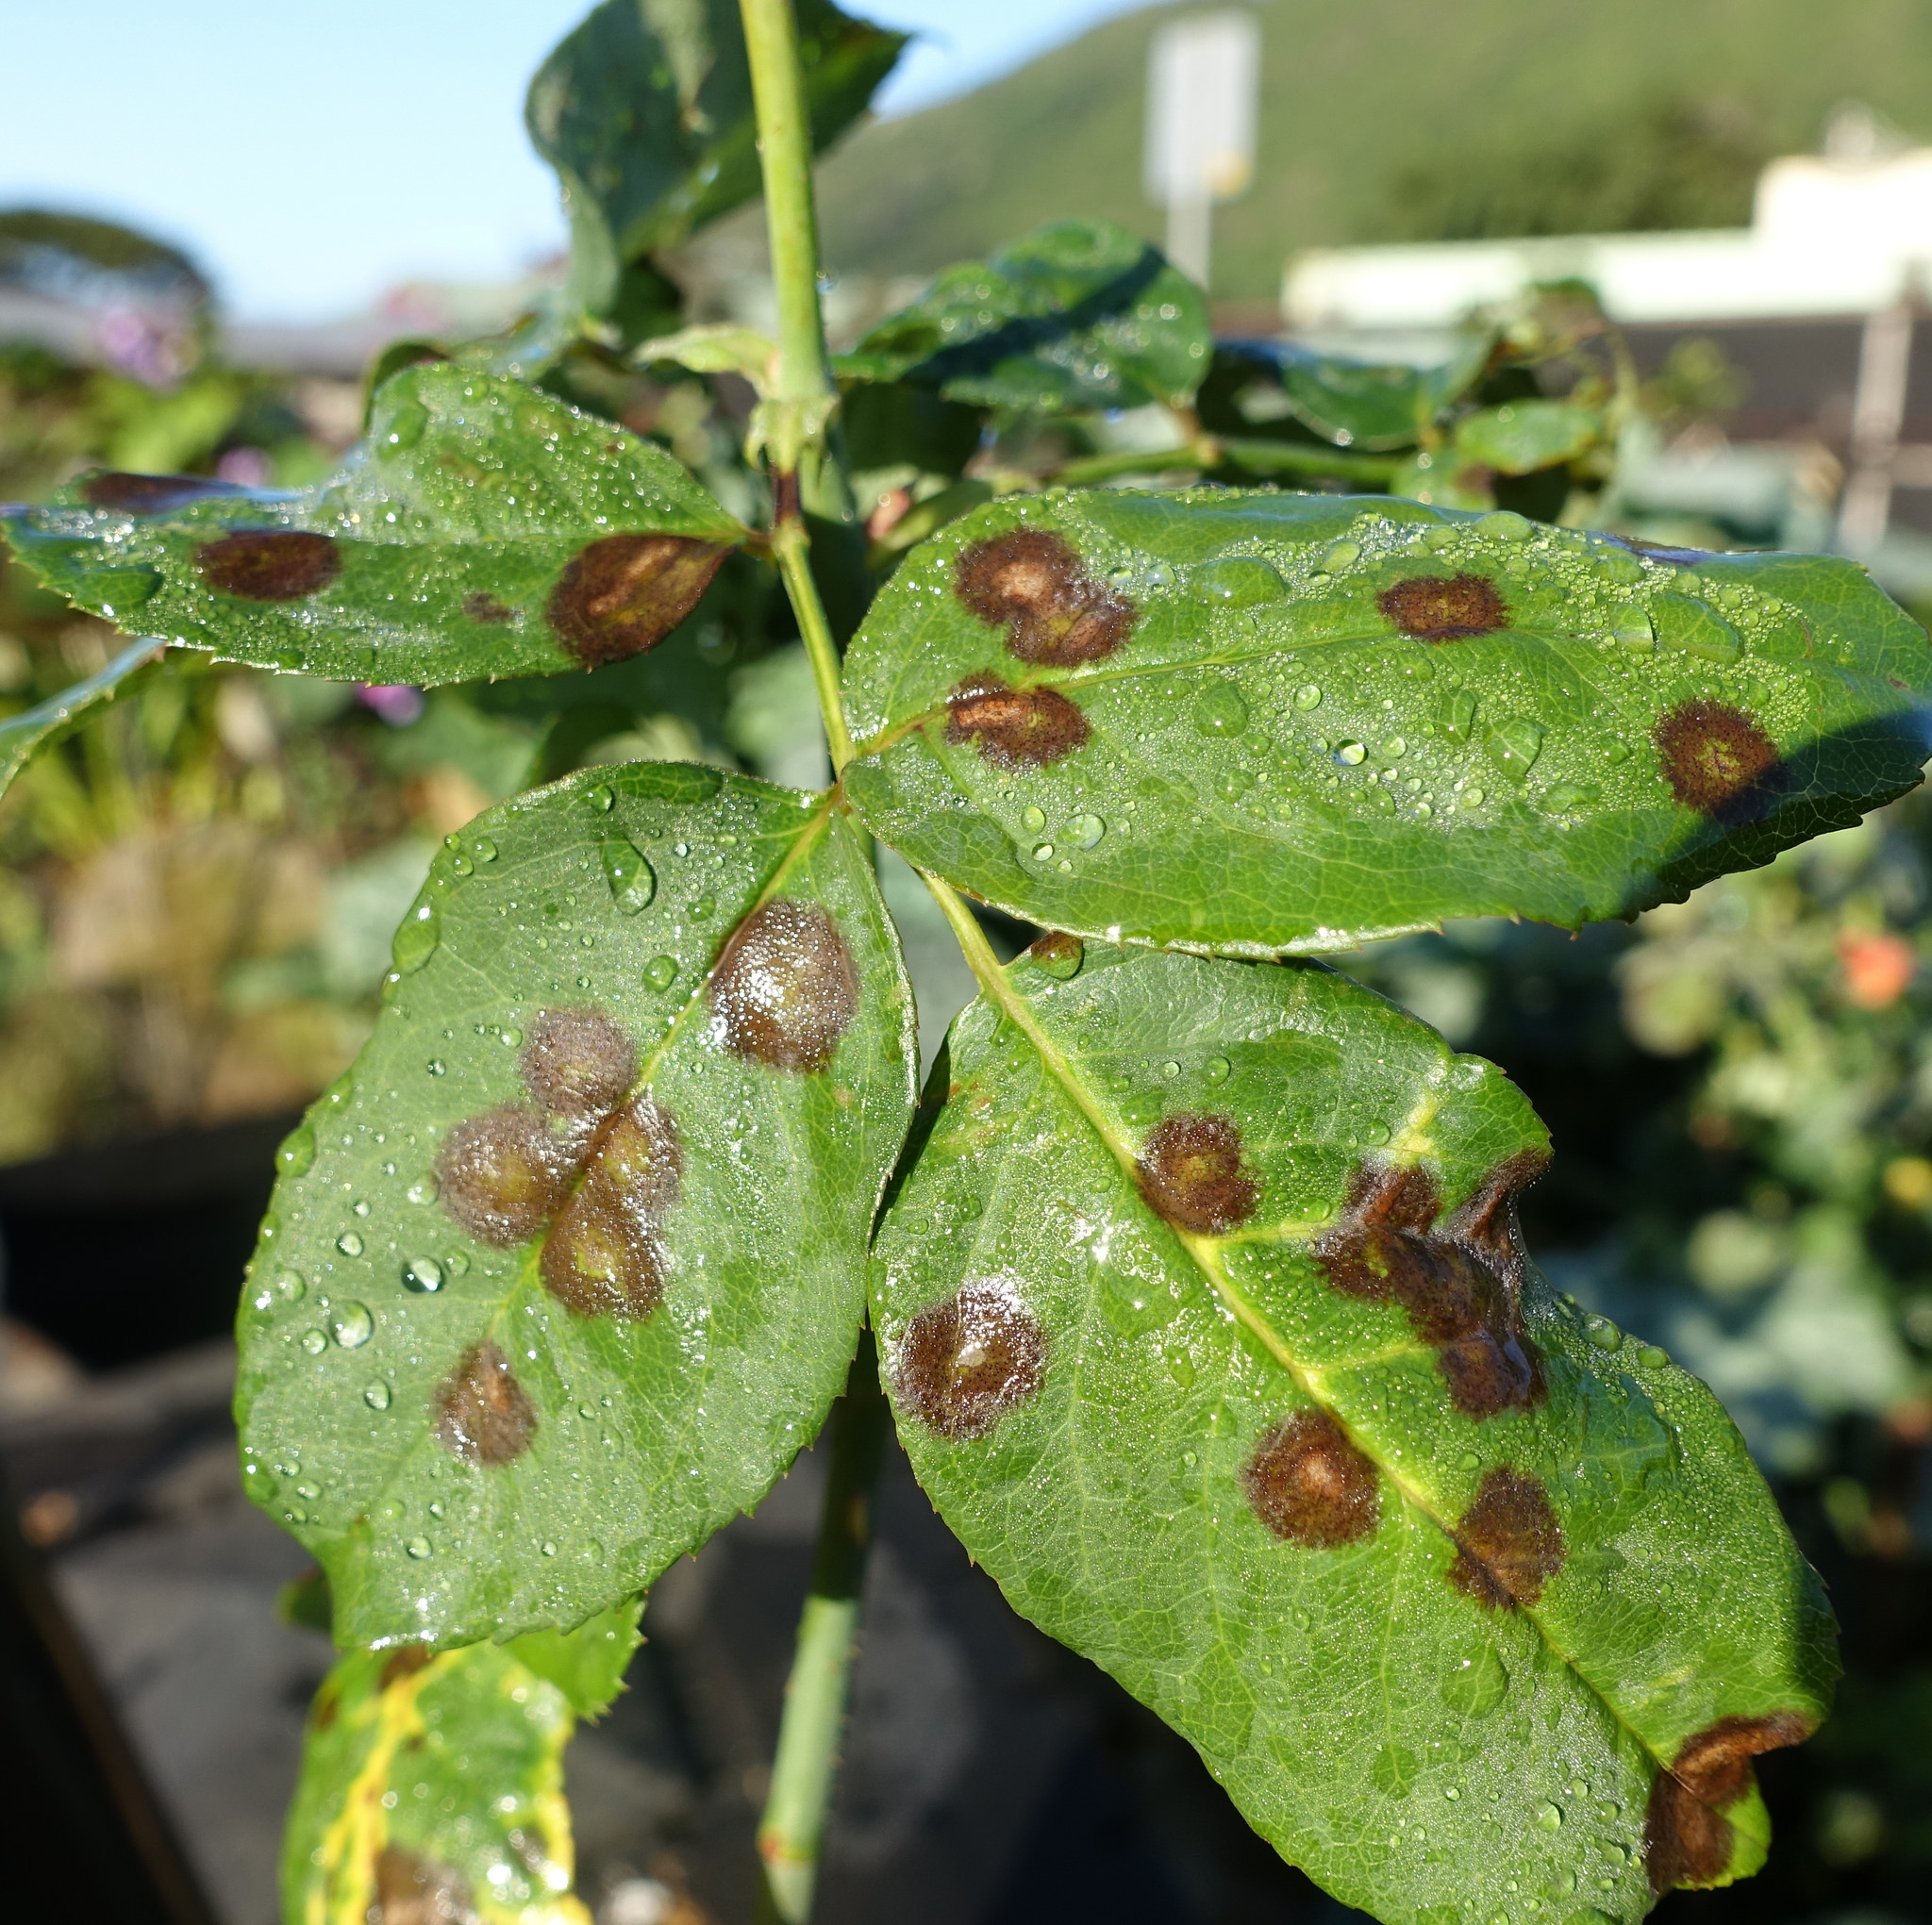 Black spot on roses and leaves